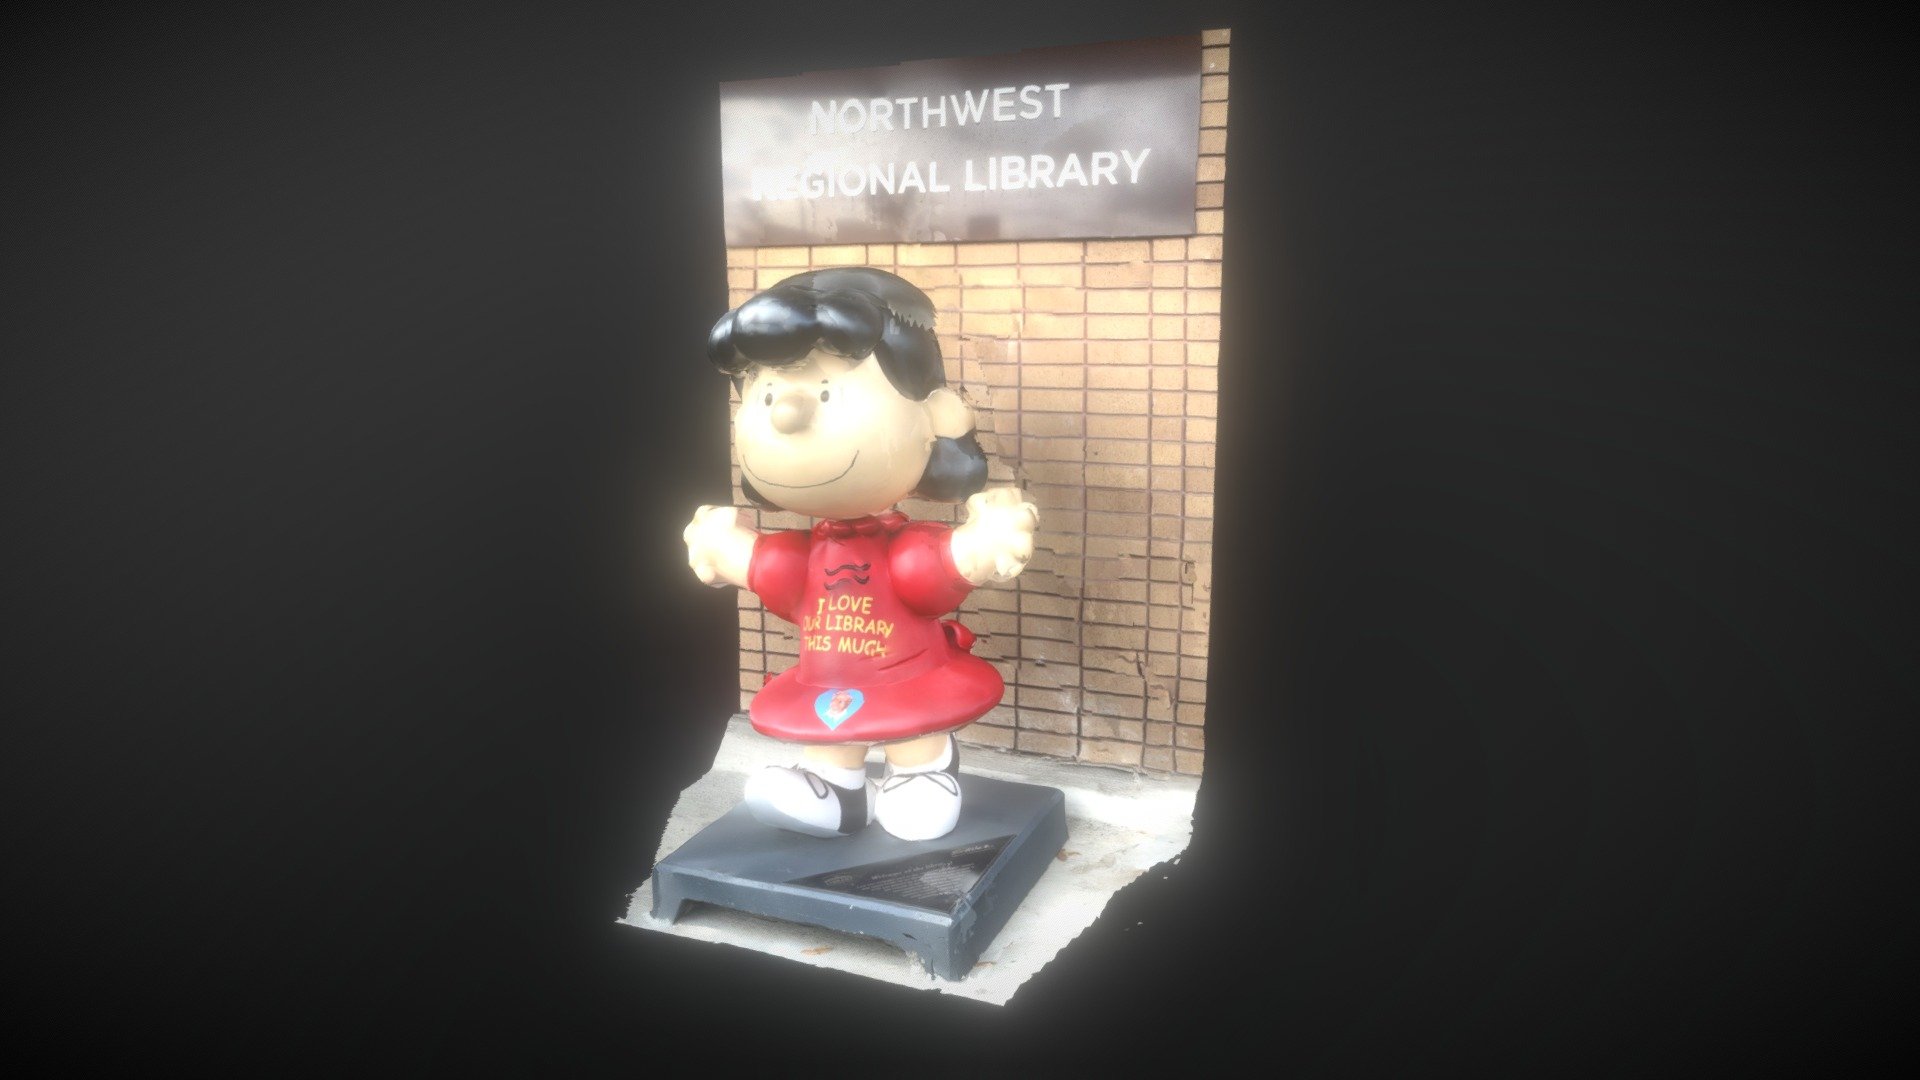 Lucy Van Pelt at the Library